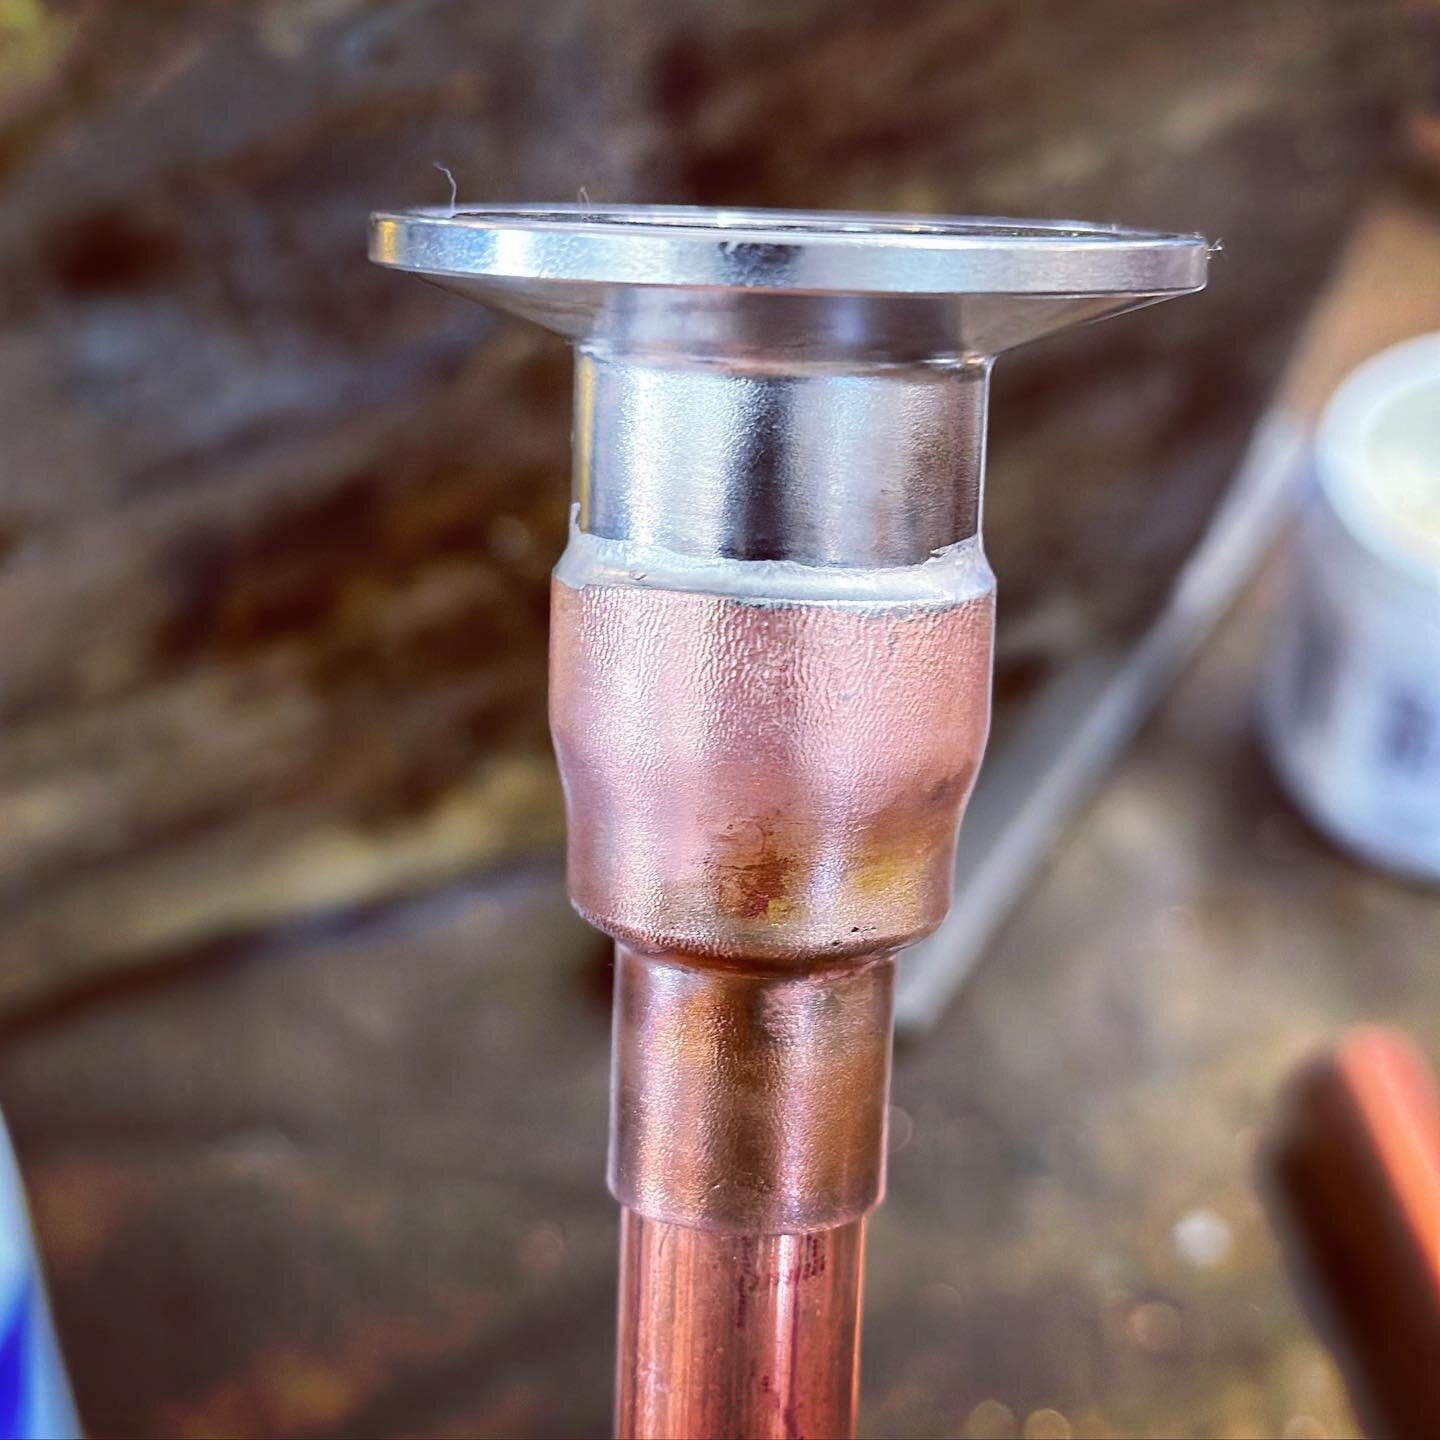 It&rsquo;s not easy (especially this application) but it isn&rsquo;t impossible. Standard plumbers #solder regular water soluble paste flux. #stainless to copper. #soldering #copperstillco #metalfab #metalfabrication #fabrication #copperstills #coppe